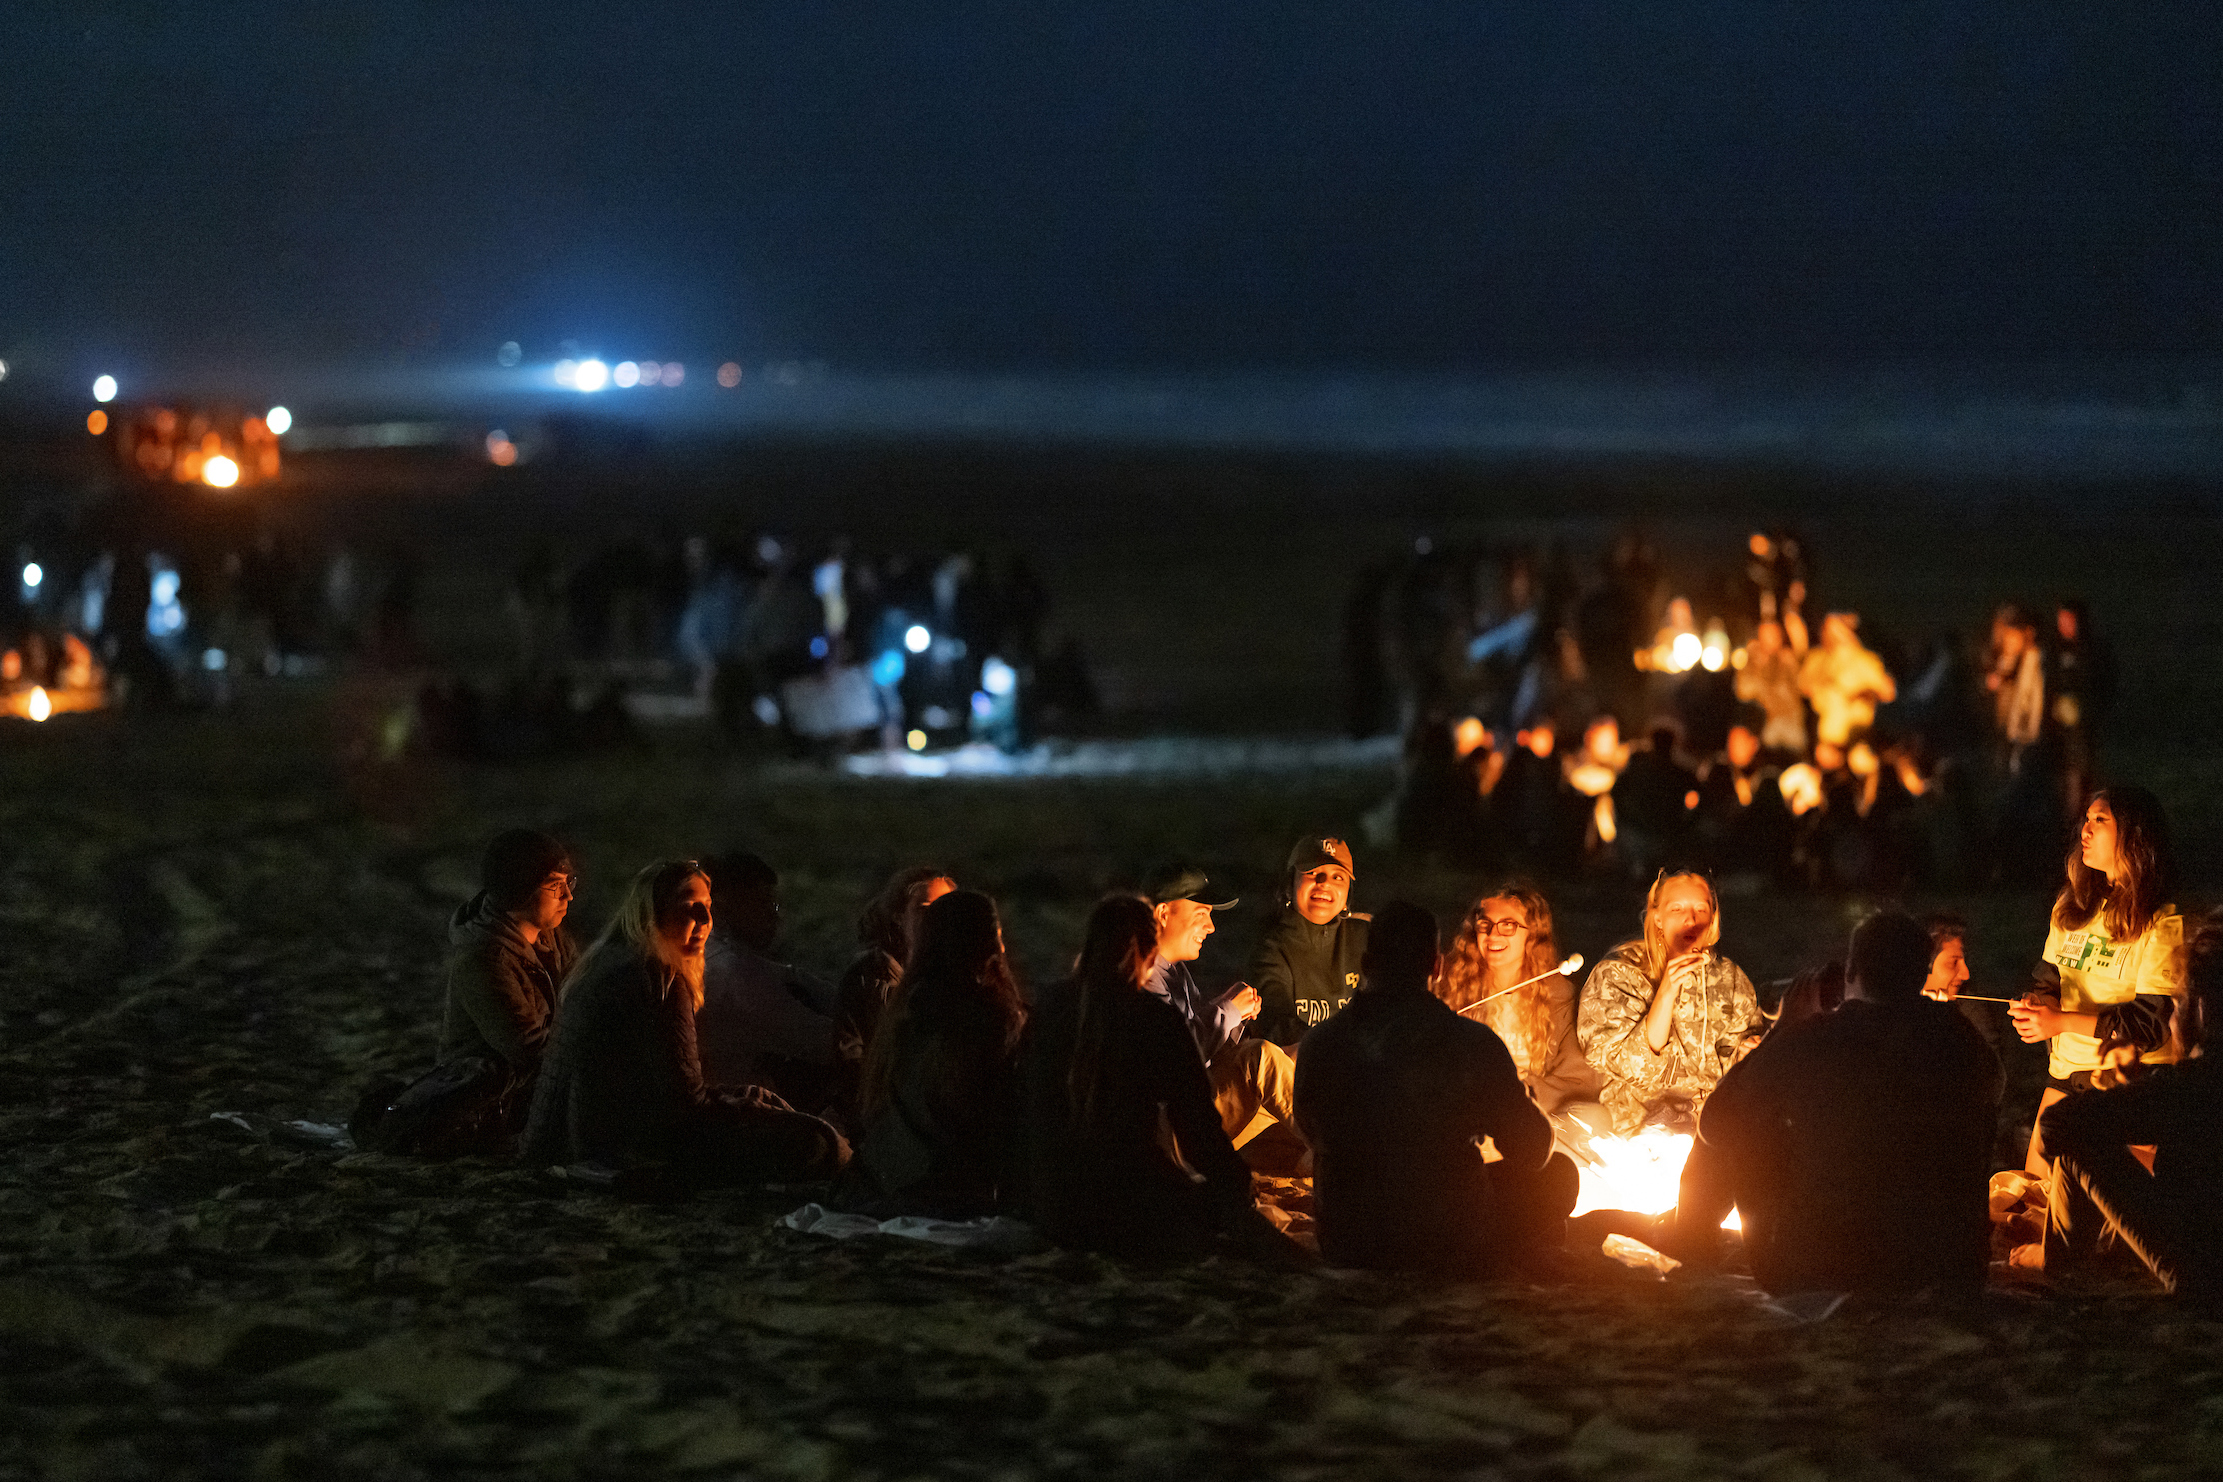 On a dark beach, clusters of students sit in circles, lit by the glow of bonfires